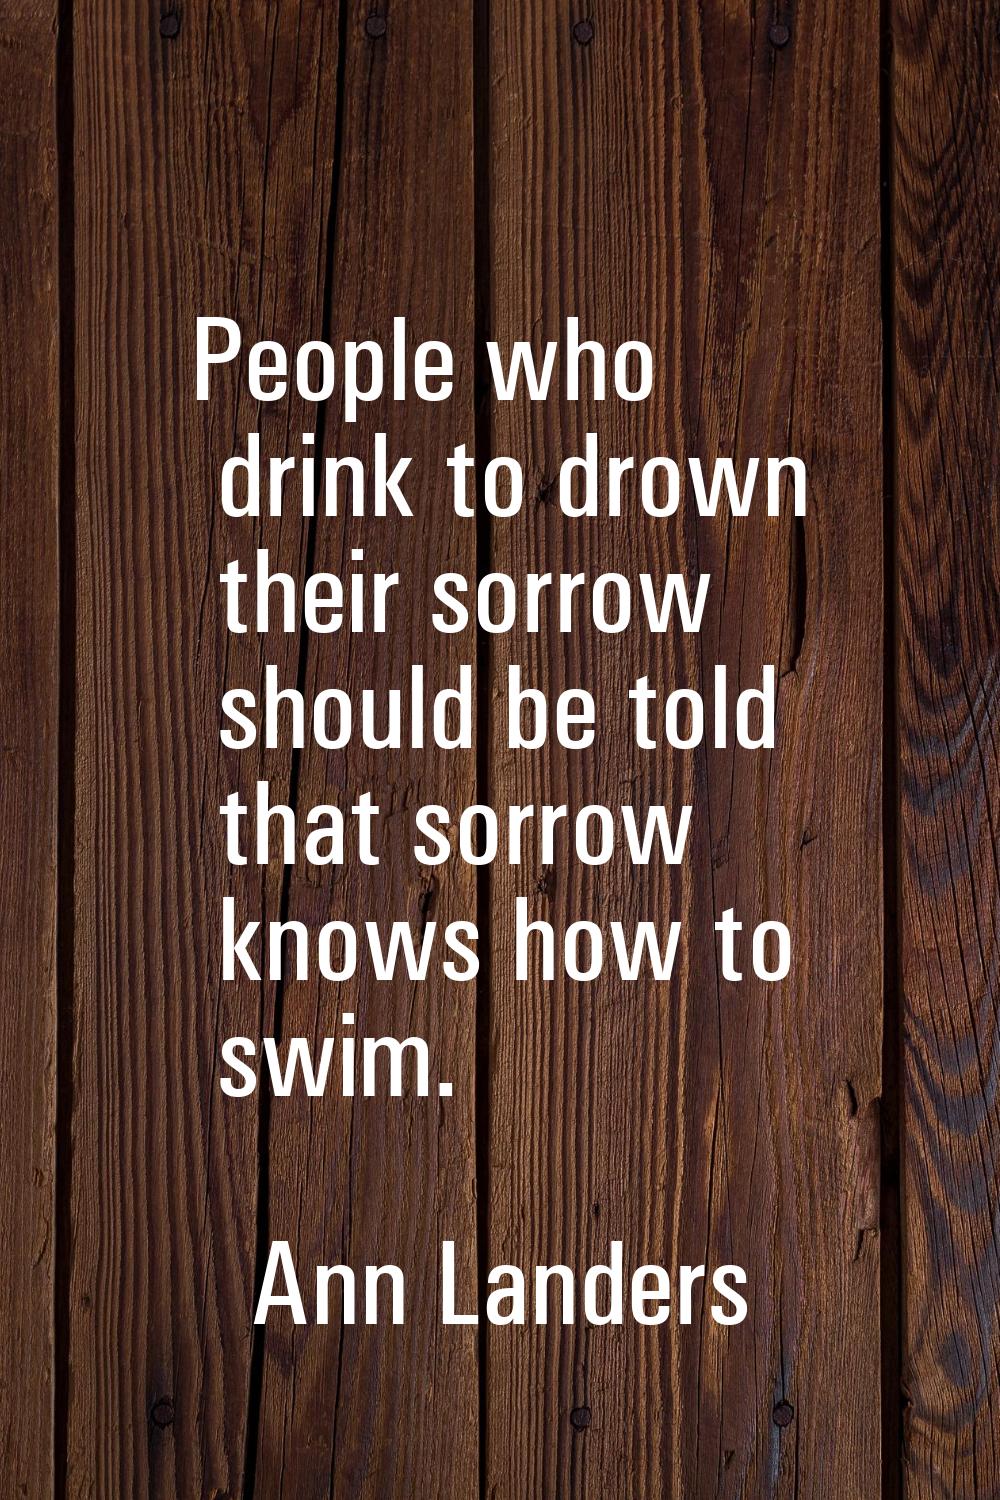 People who drink to drown their sorrow should be told that sorrow knows how to swim.